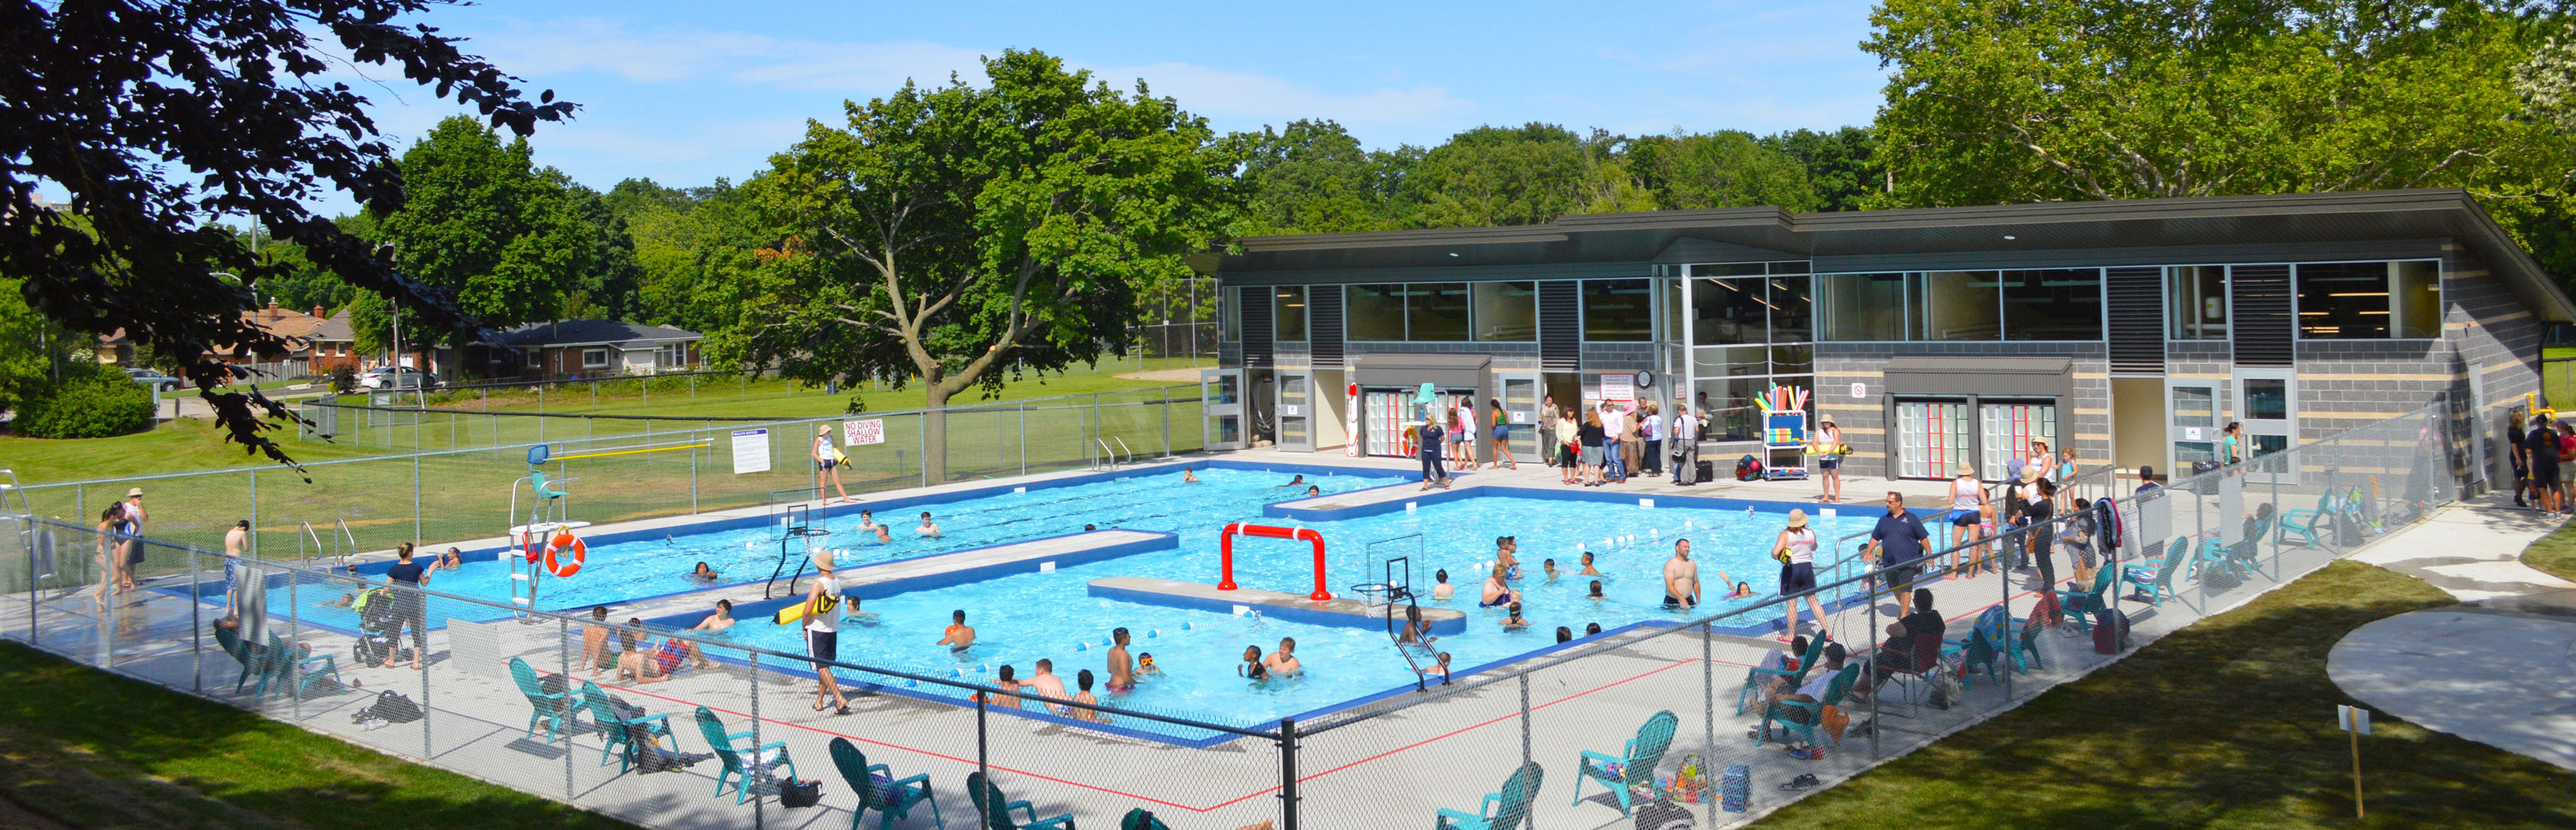 Outdoor swimming pool on a summer day